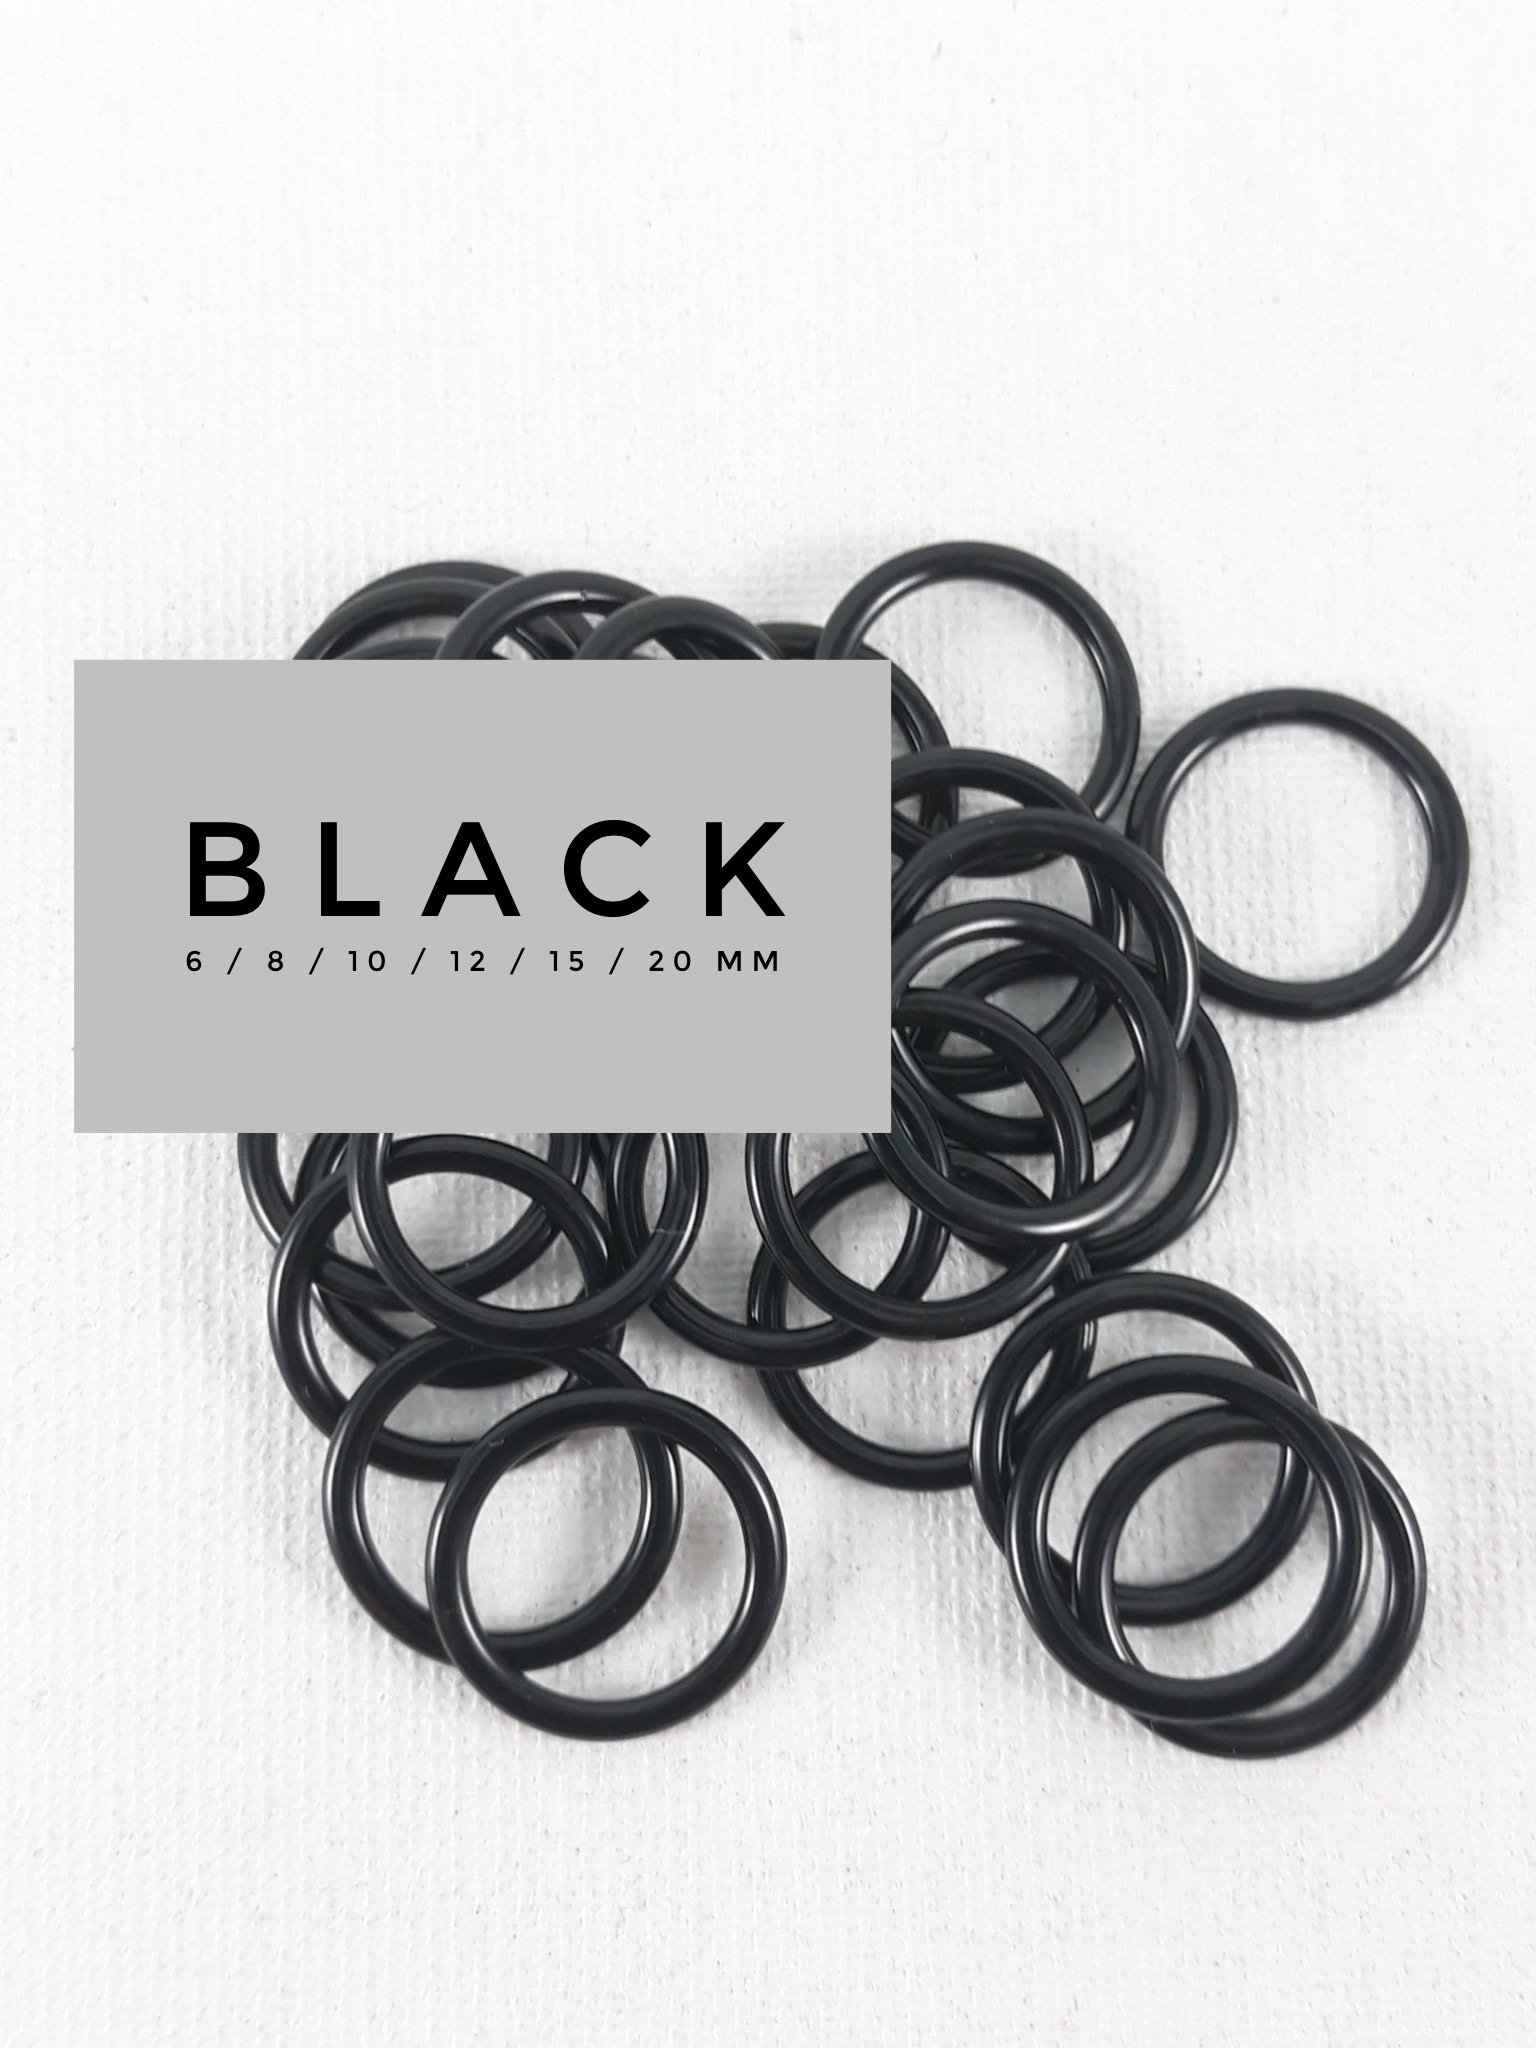 25mm ID 3.8mm Thickness Metal O Ring Iron Silver Tone 15 Pack 